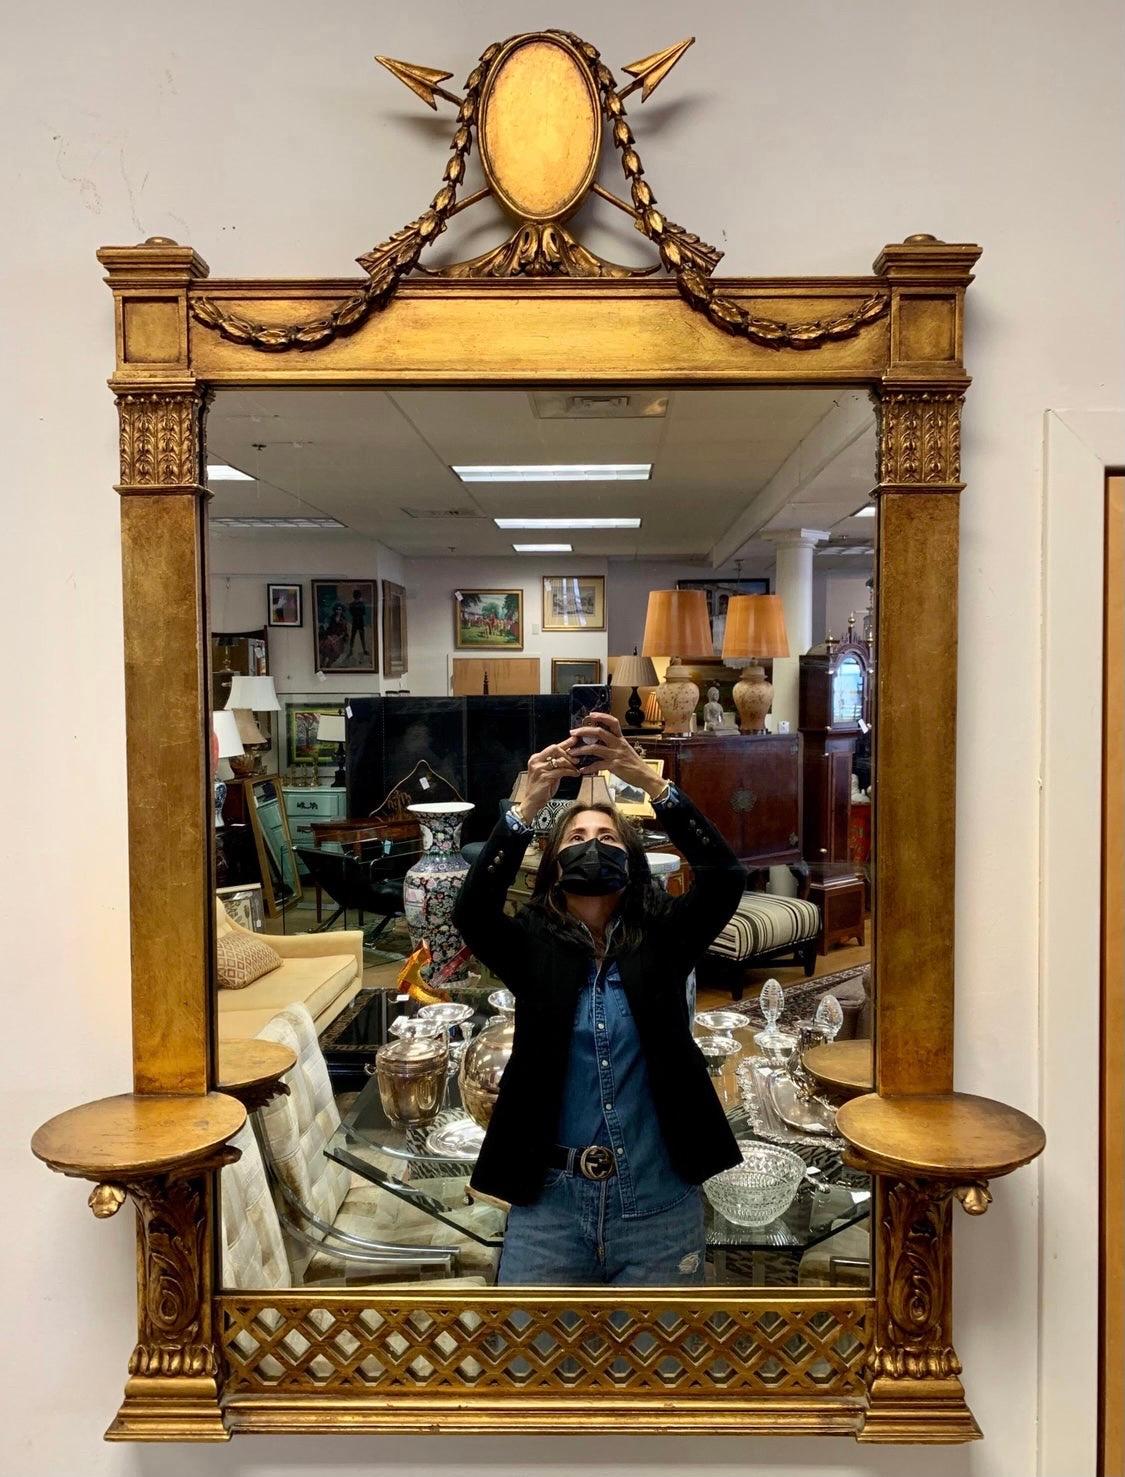 Like none you've ever seen, this Italian beauty from the late 19th century is sure to dazzle. 19th Century Italian mirror with crest featuring a medallion with swags and arrows. Bottom portion of mirror has ornately carved wall brackets on each